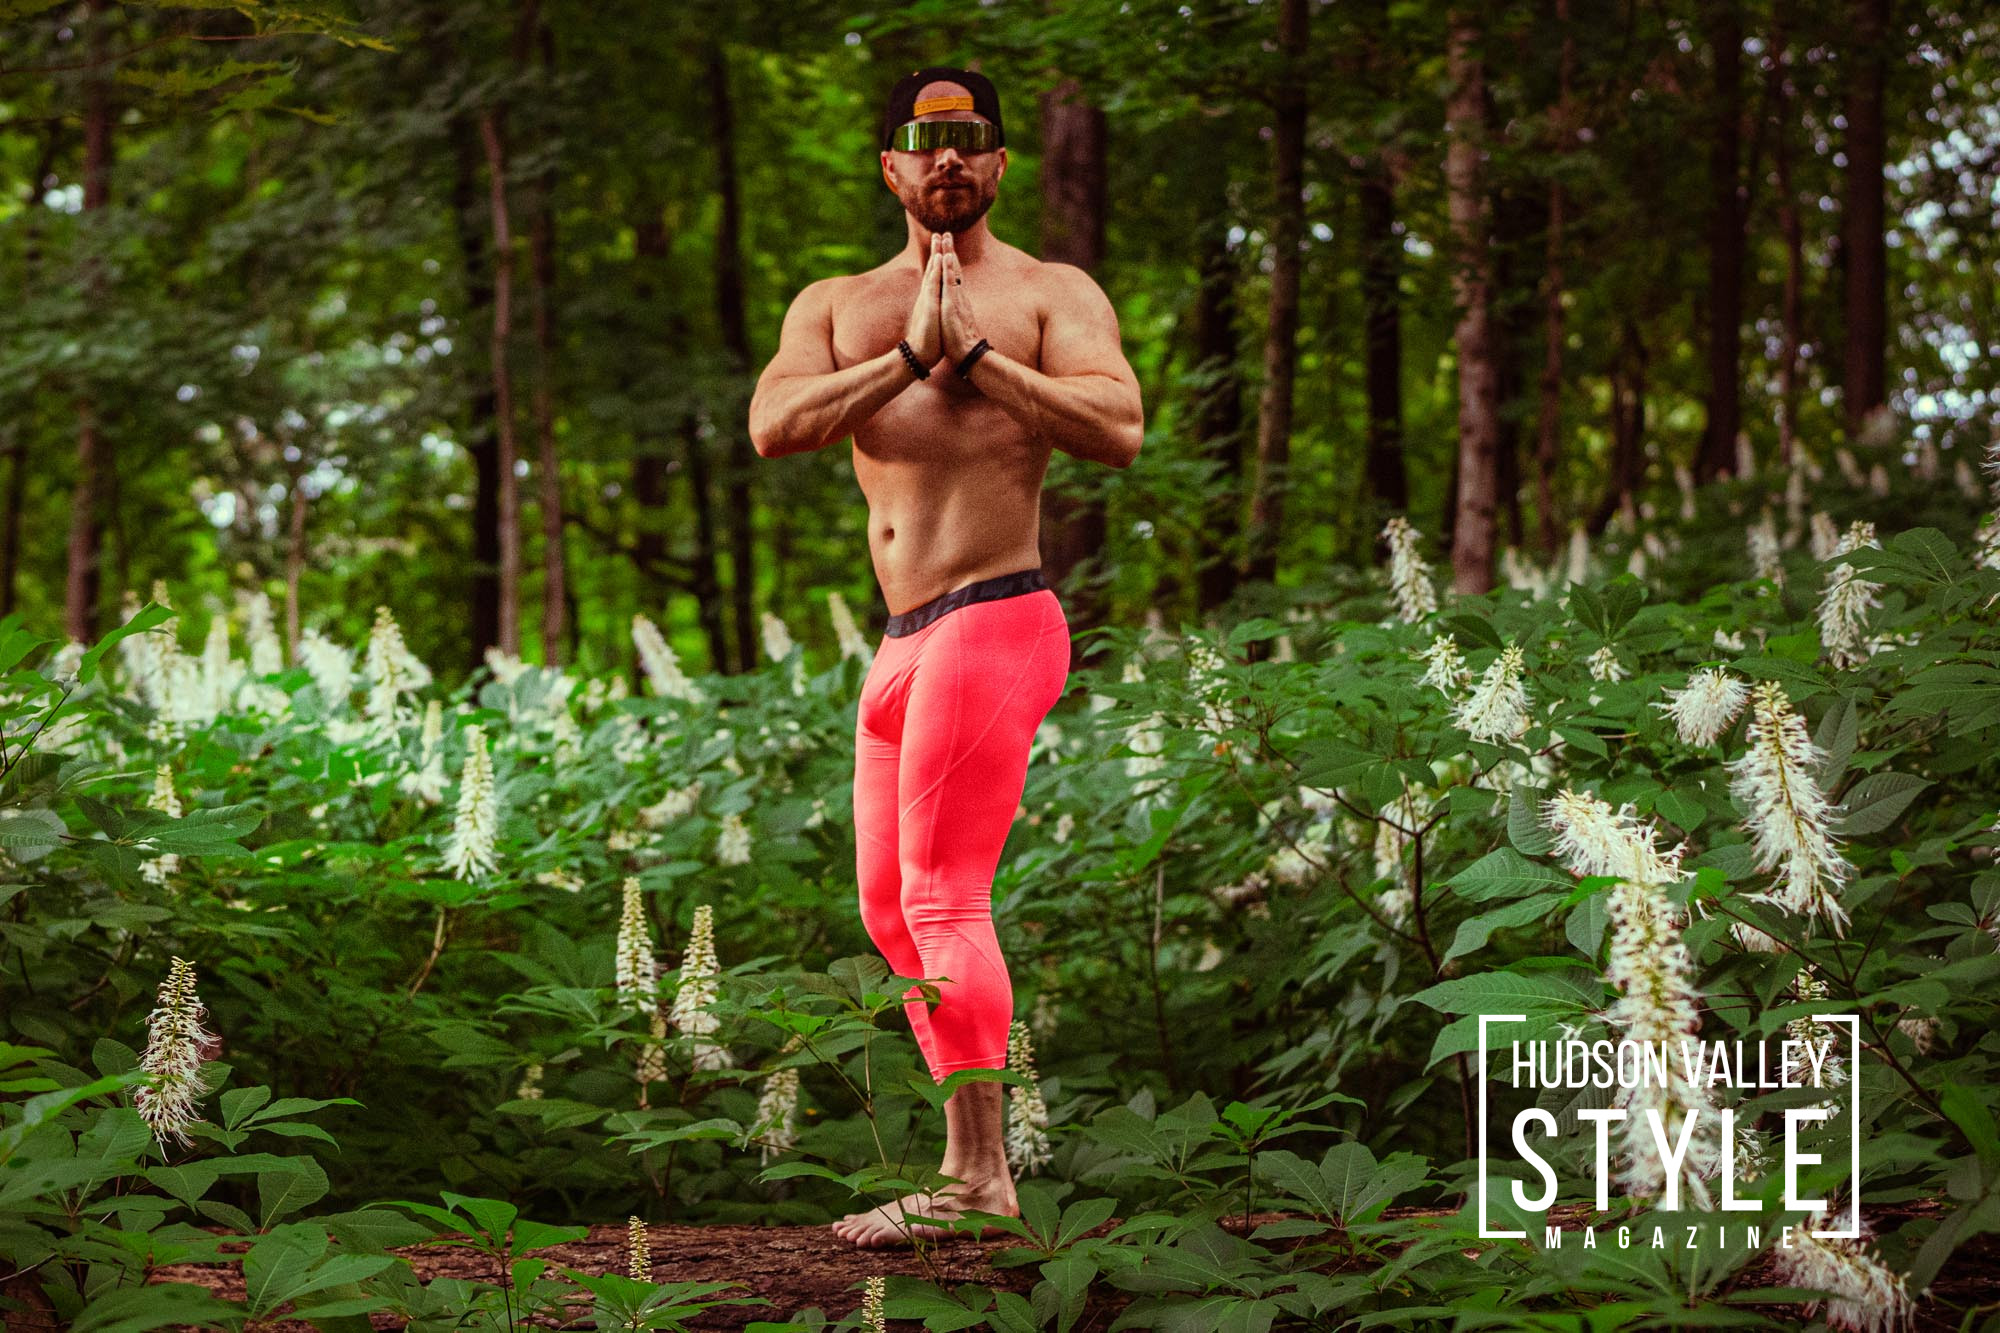 24-Hour Digital Detox: A Weekly Reset for Your Mind and Soul – Wellness 101 with Maxwell Alexander – Photography by Duncan Avenue Studios